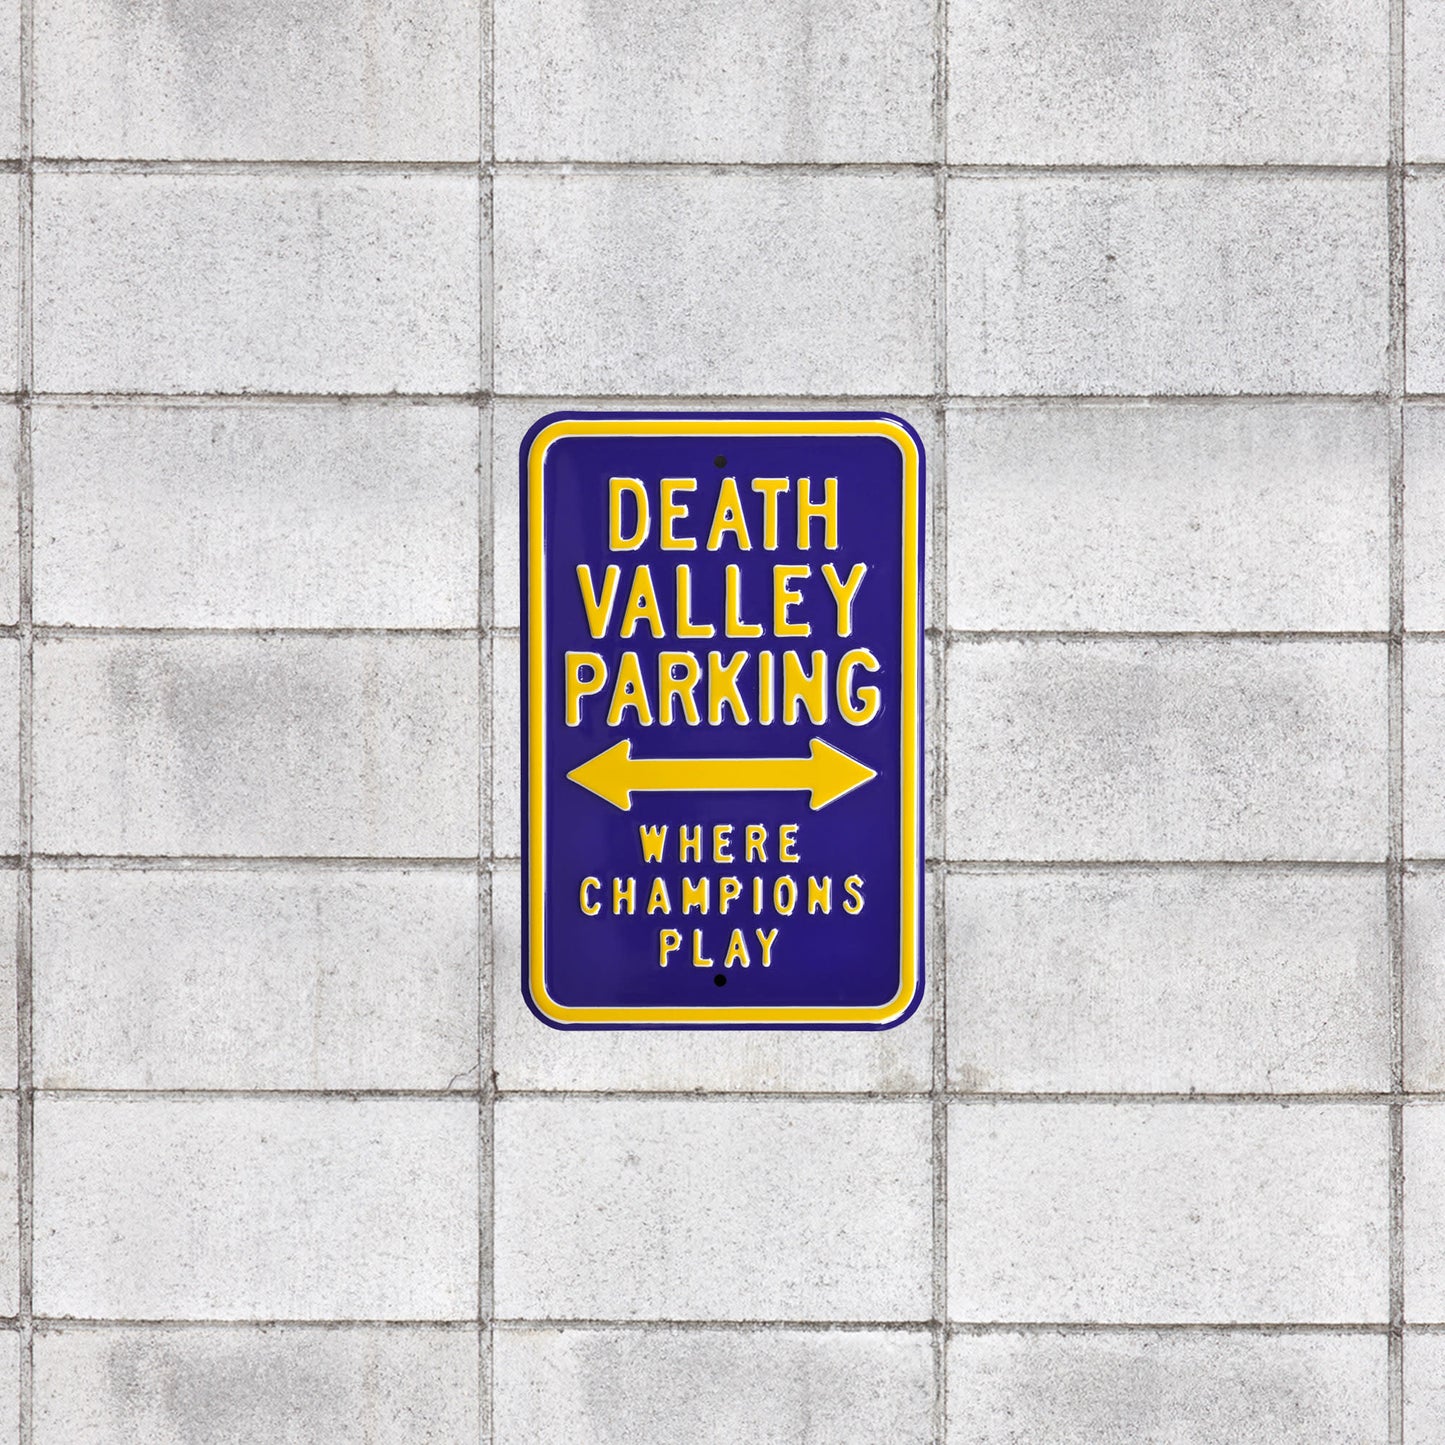 LSU Tigers: Death Valley Parking - Officially Licensed Metal Street Sign